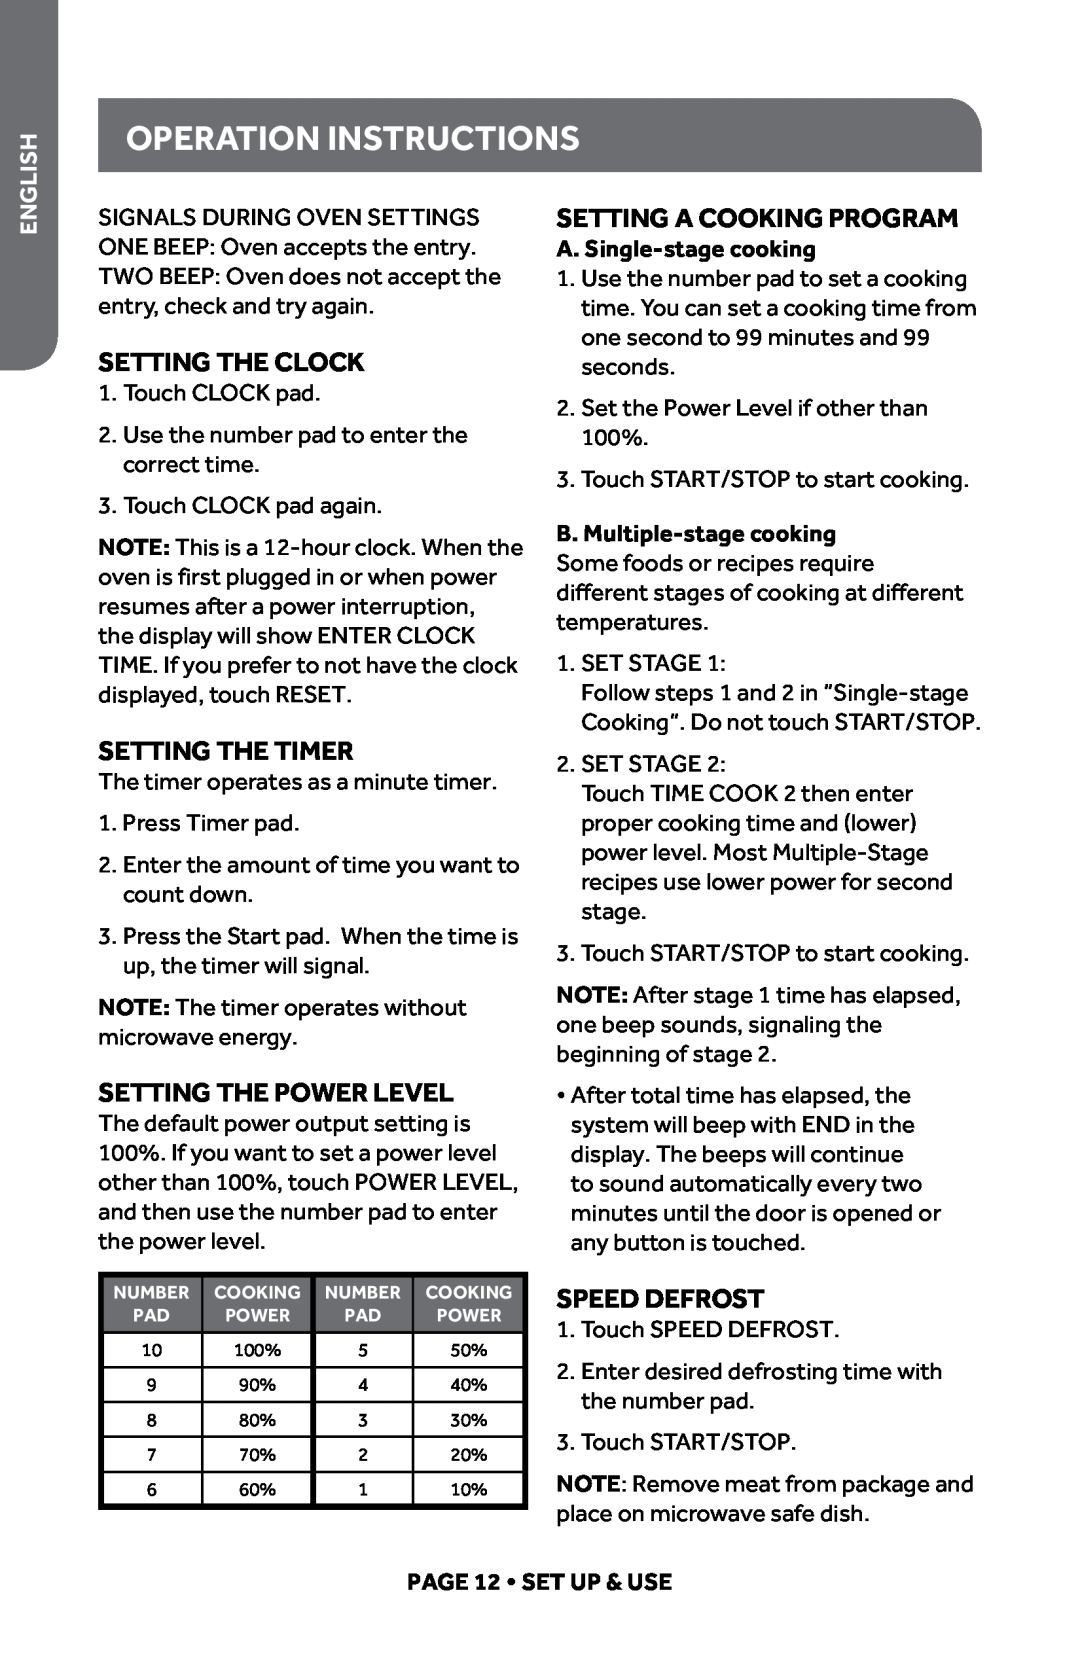 Haier HMC920BEWW Operation Instructions, Setting The Clock, Setting the Timer, Setting A Cooking Program, Speed Defrost 